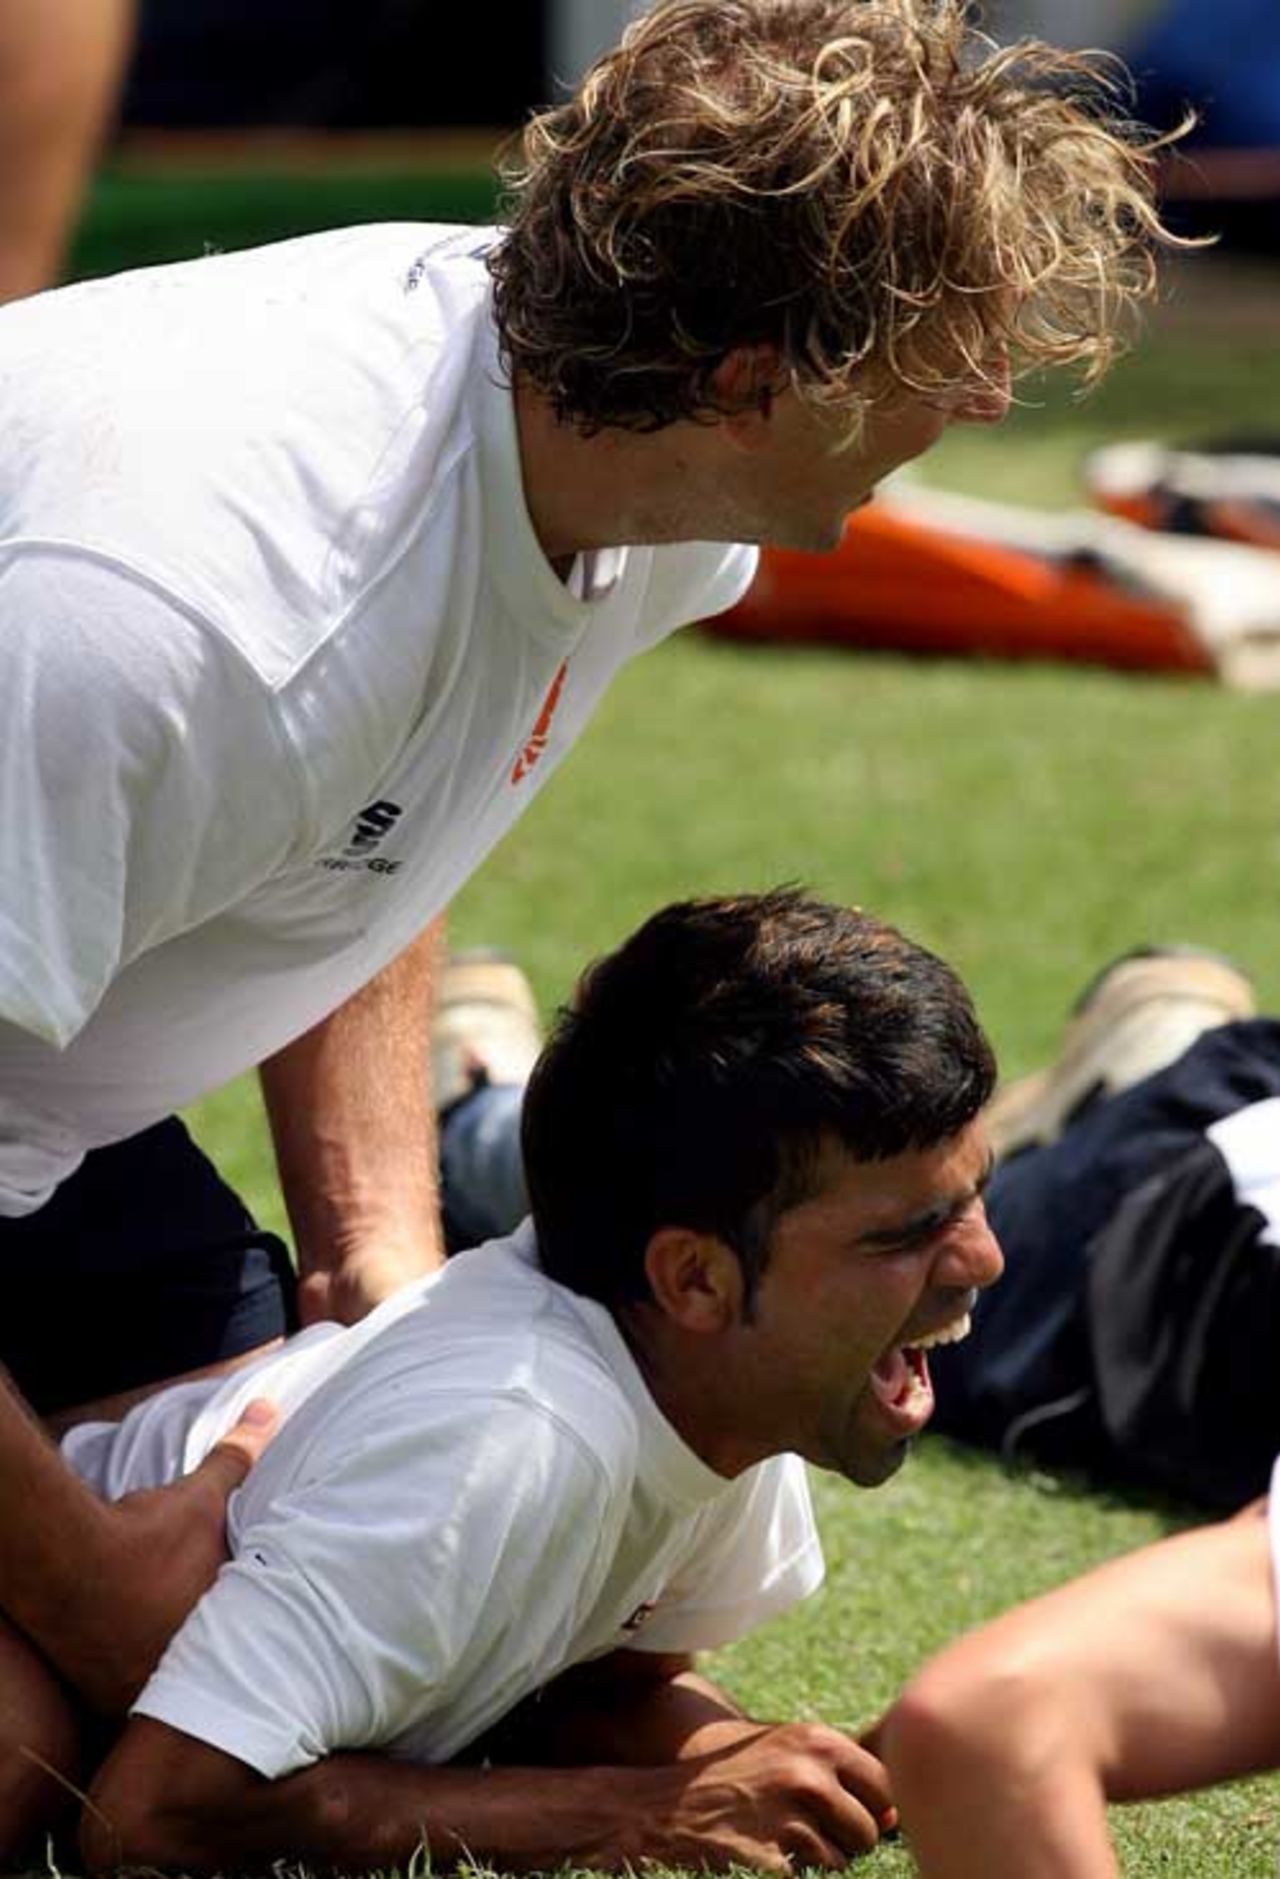 Netherlands bowler Daan van Bunge shares light moment with team-mate Mohammad Kashif, St Kitts, March 17, 2007